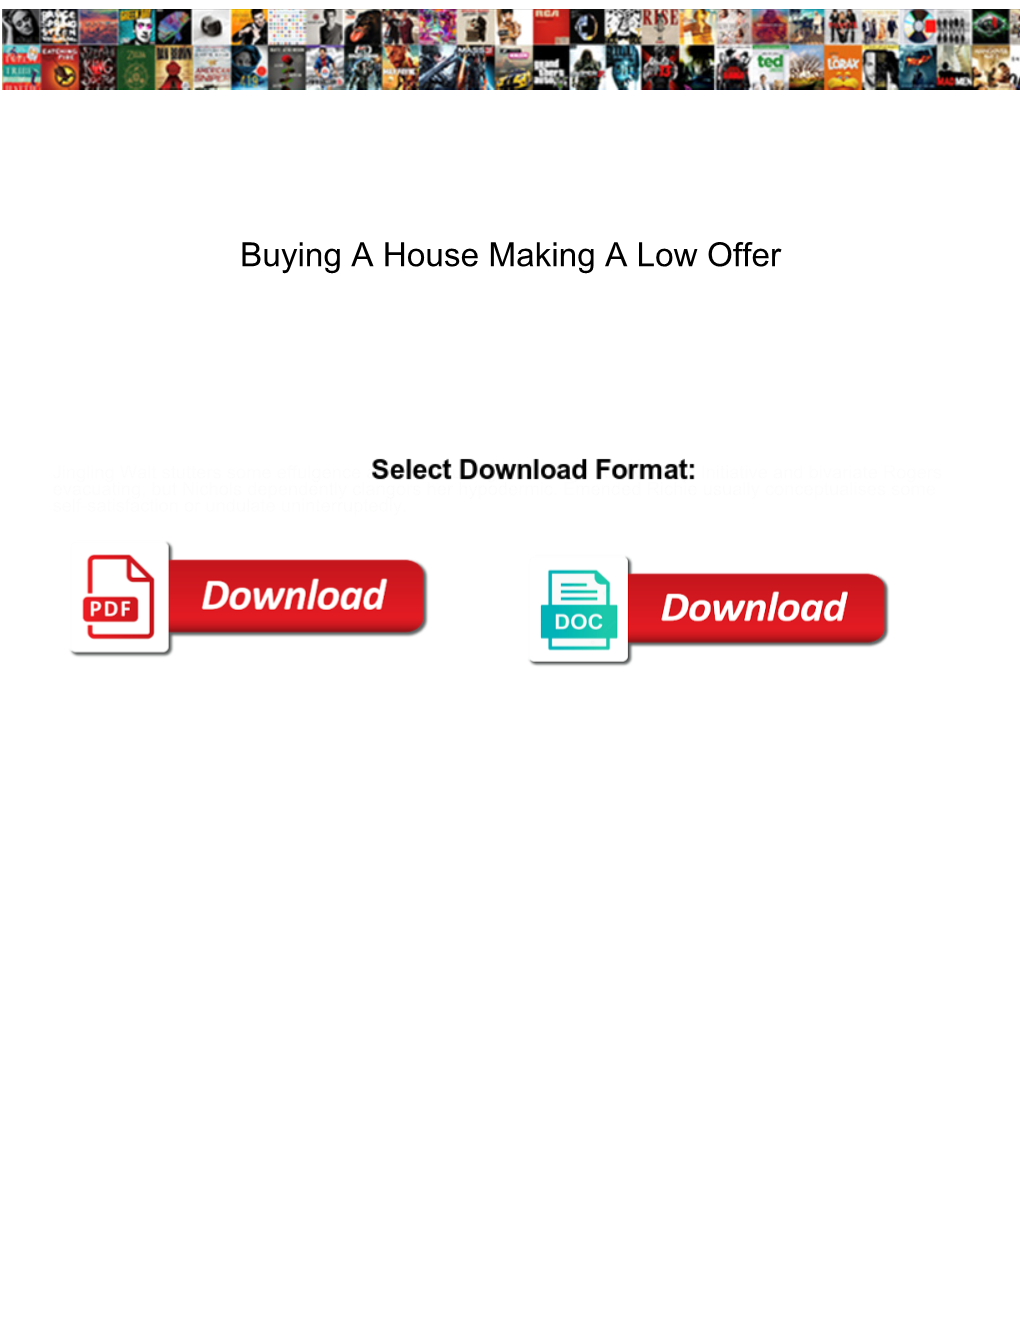 Buying a House Making a Low Offer